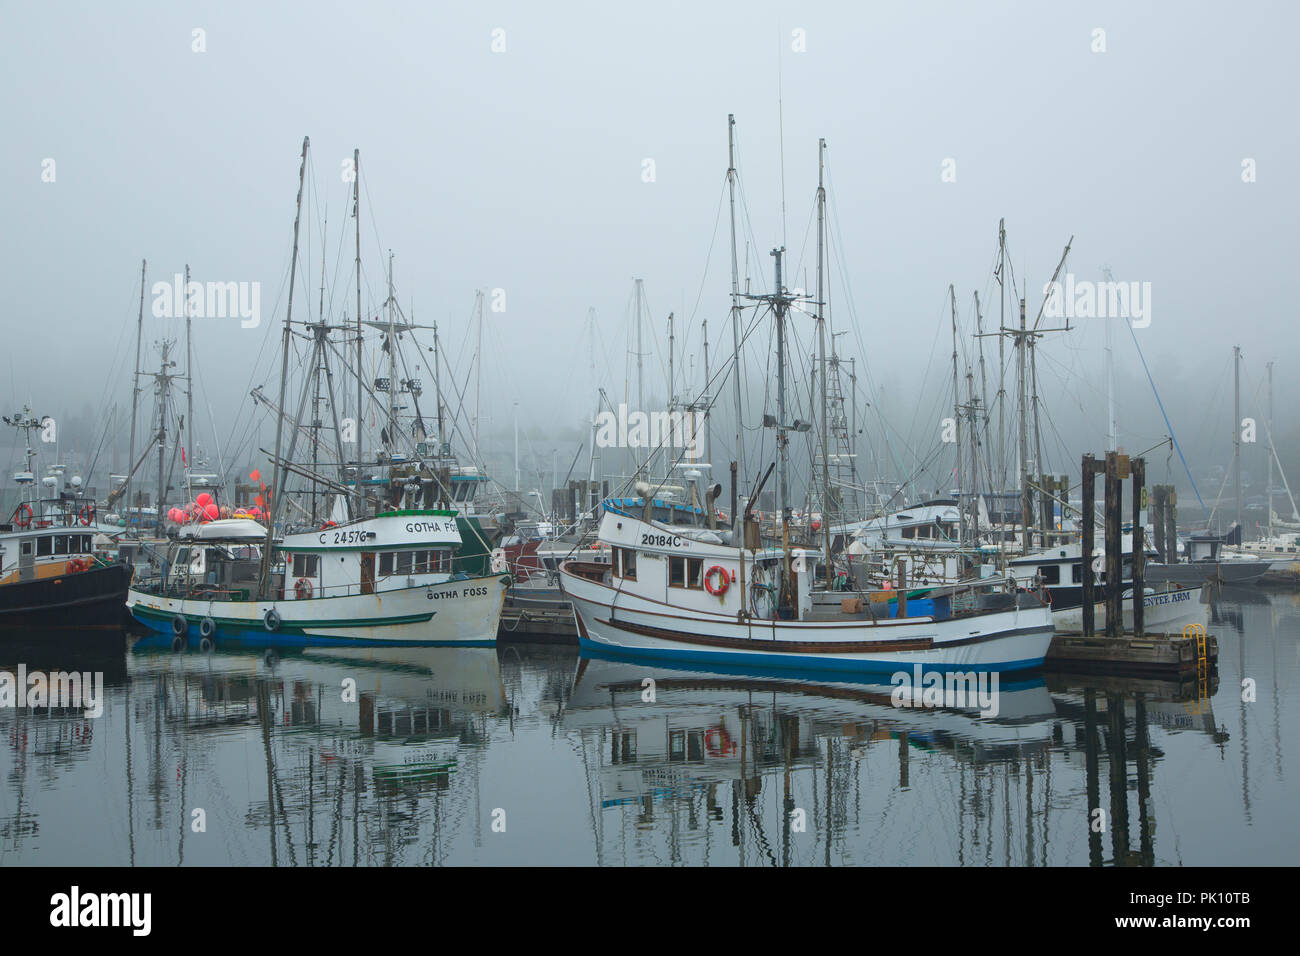 Boats in fog, Ucluelet Harbour, Ucluelet, British Columbia, Canada Stock Photo